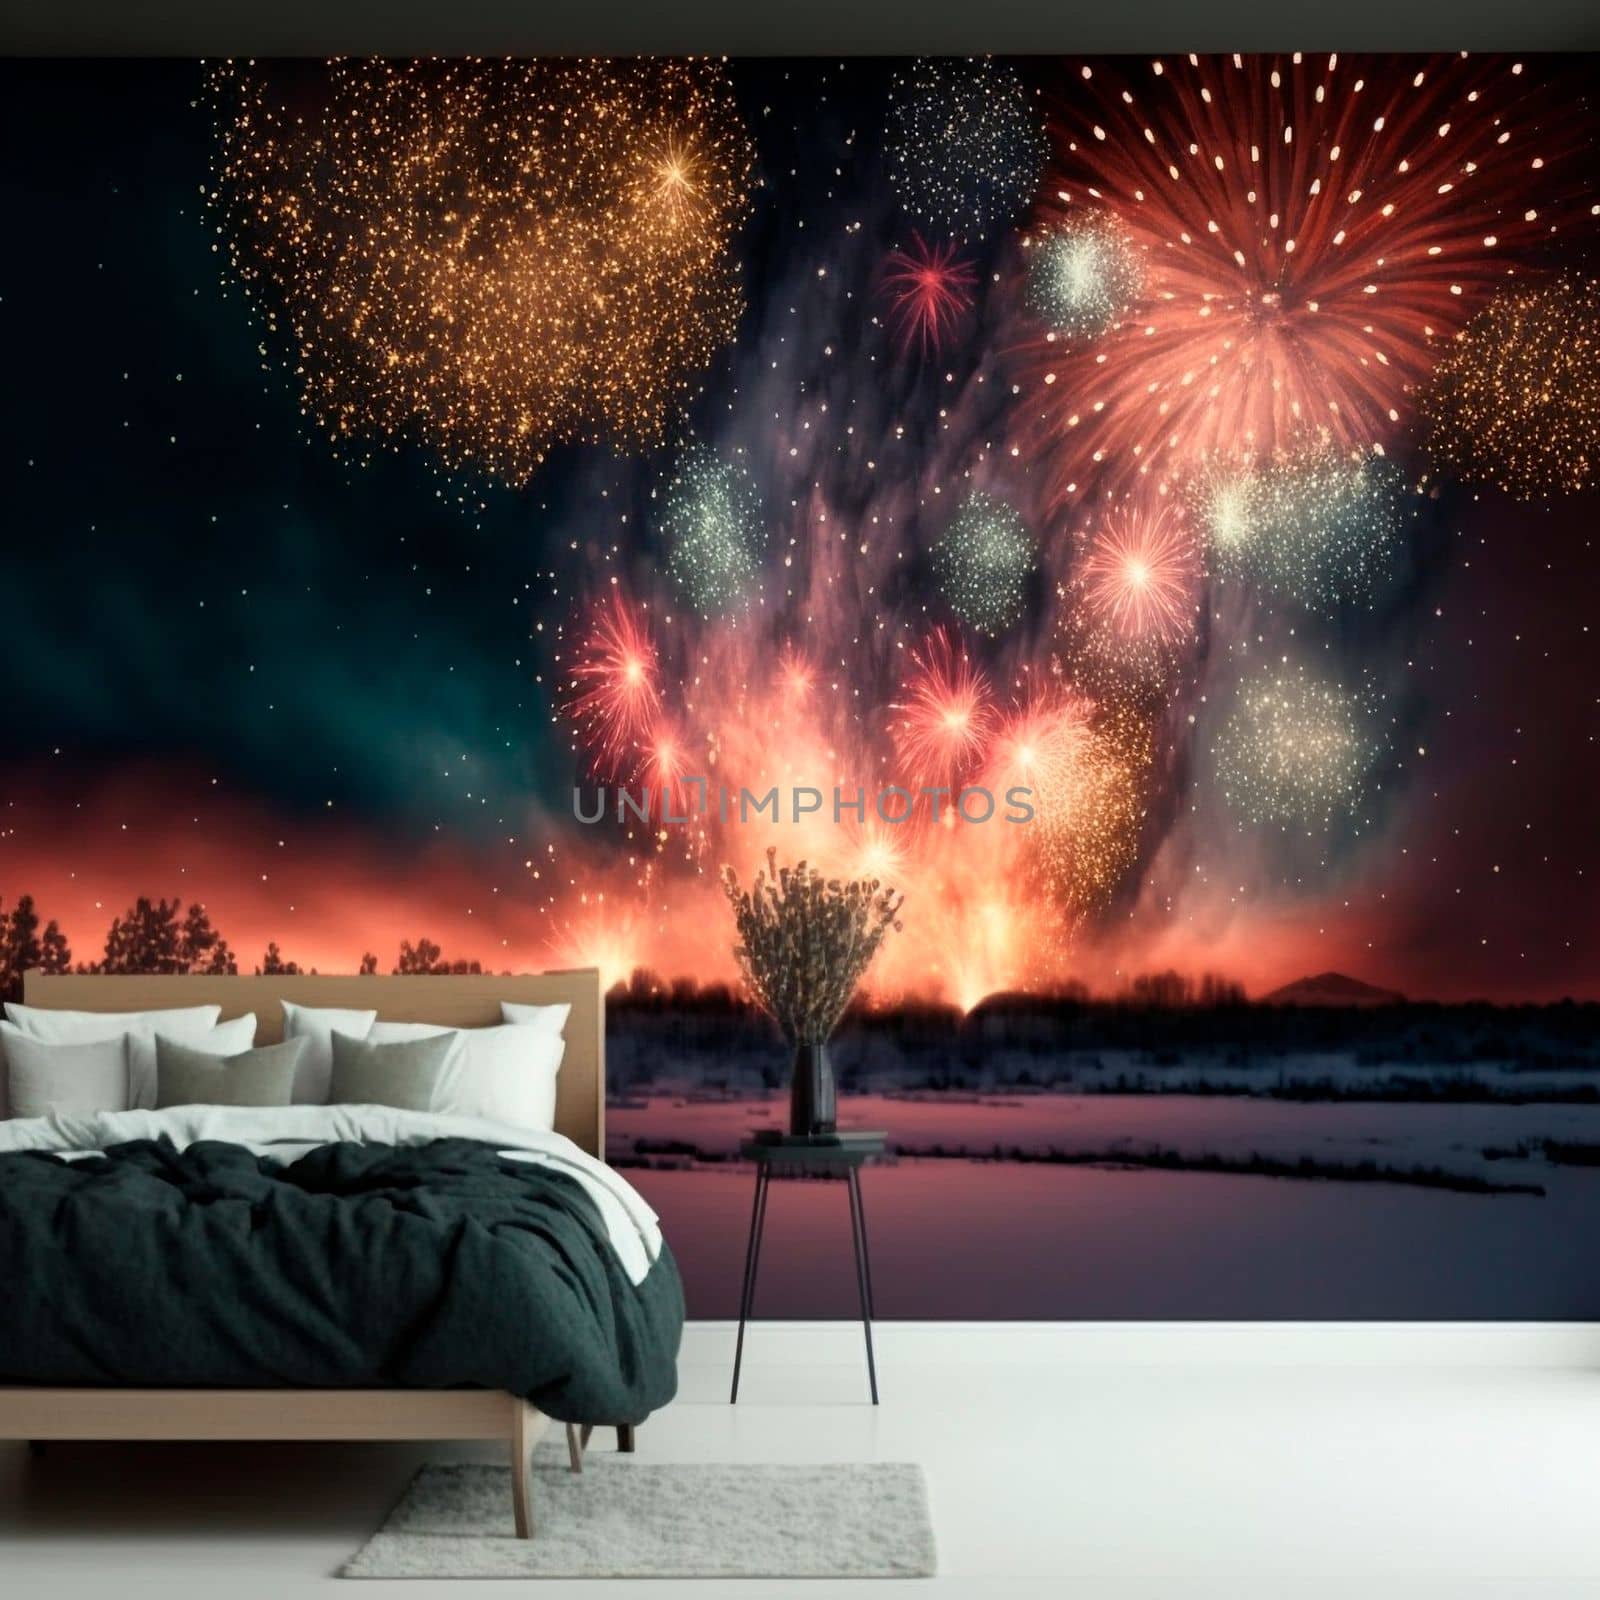 Bedroom with wallpaper depicting the night sky in fireworks. High quality illustration